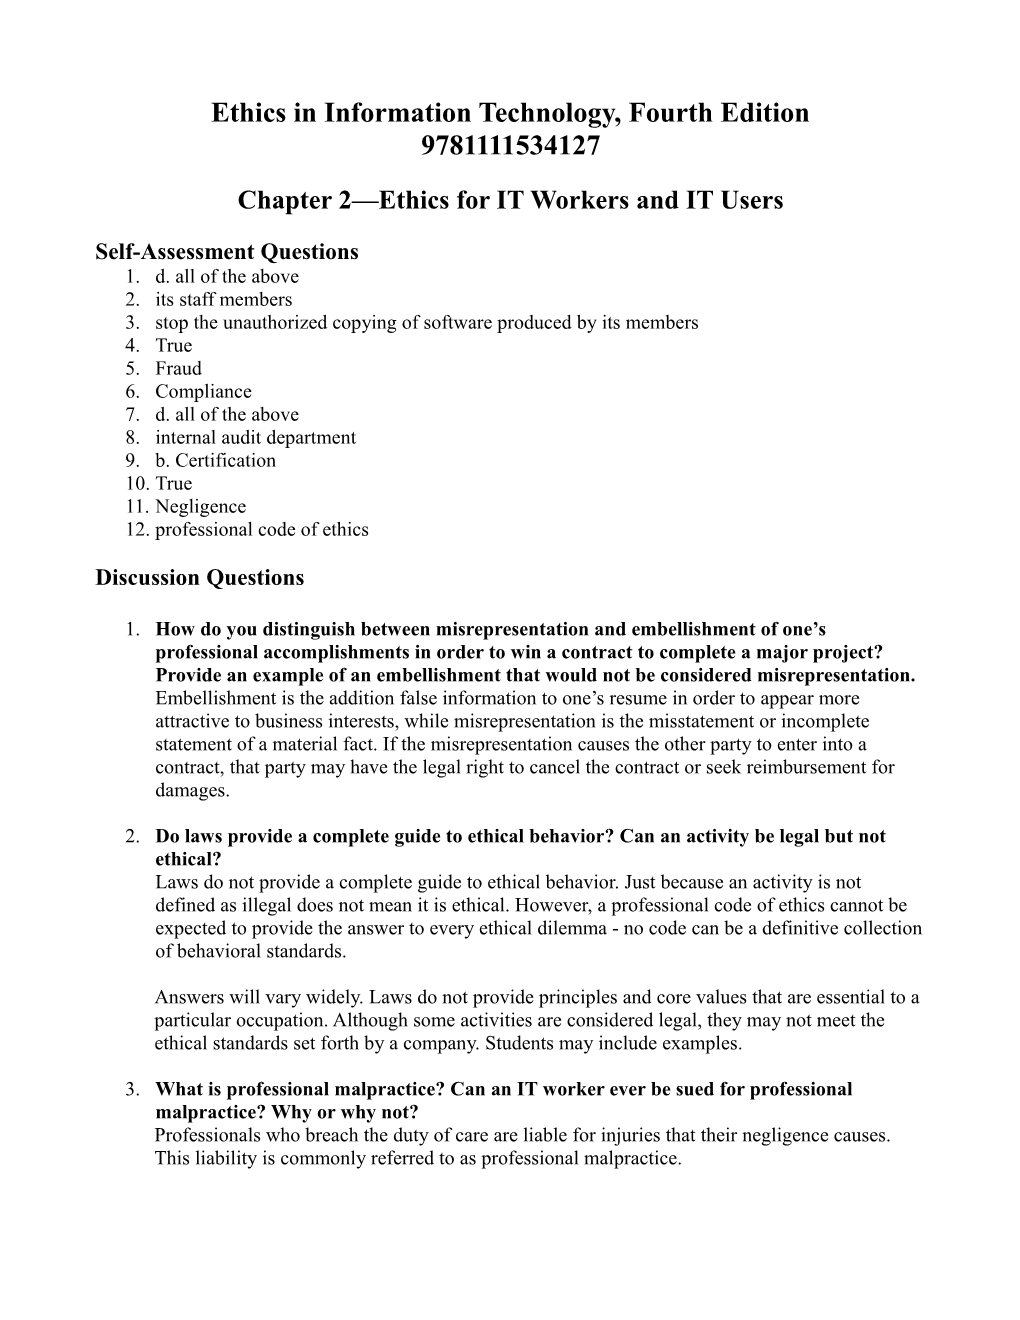 Chapter 2 Ethics for IT Workers and IT Users